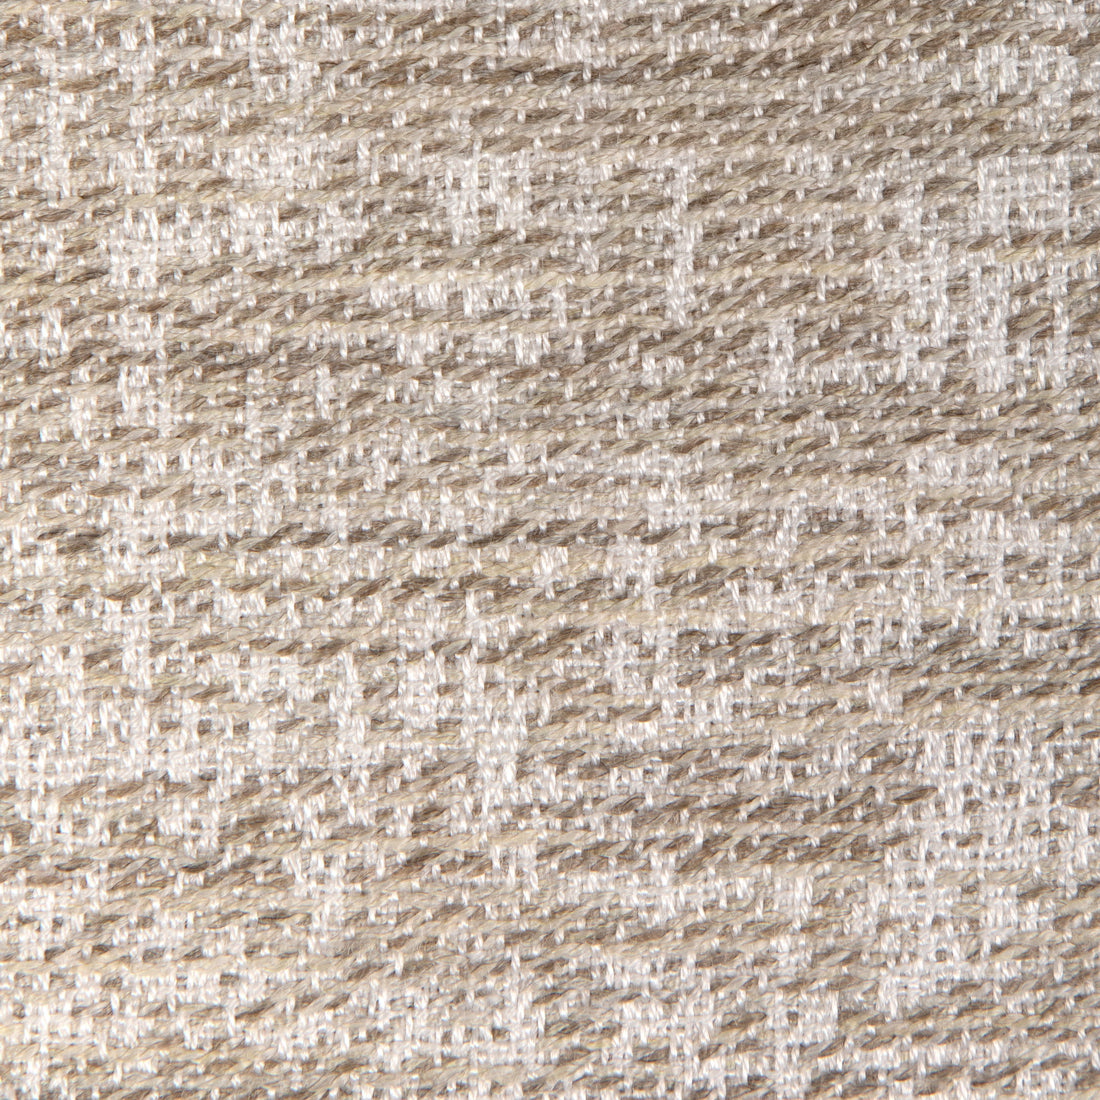 Closeup detail view of Seadrift fabric in sand color - pattern 36919.16.0 - by Kravet Couture in the Riviera collection